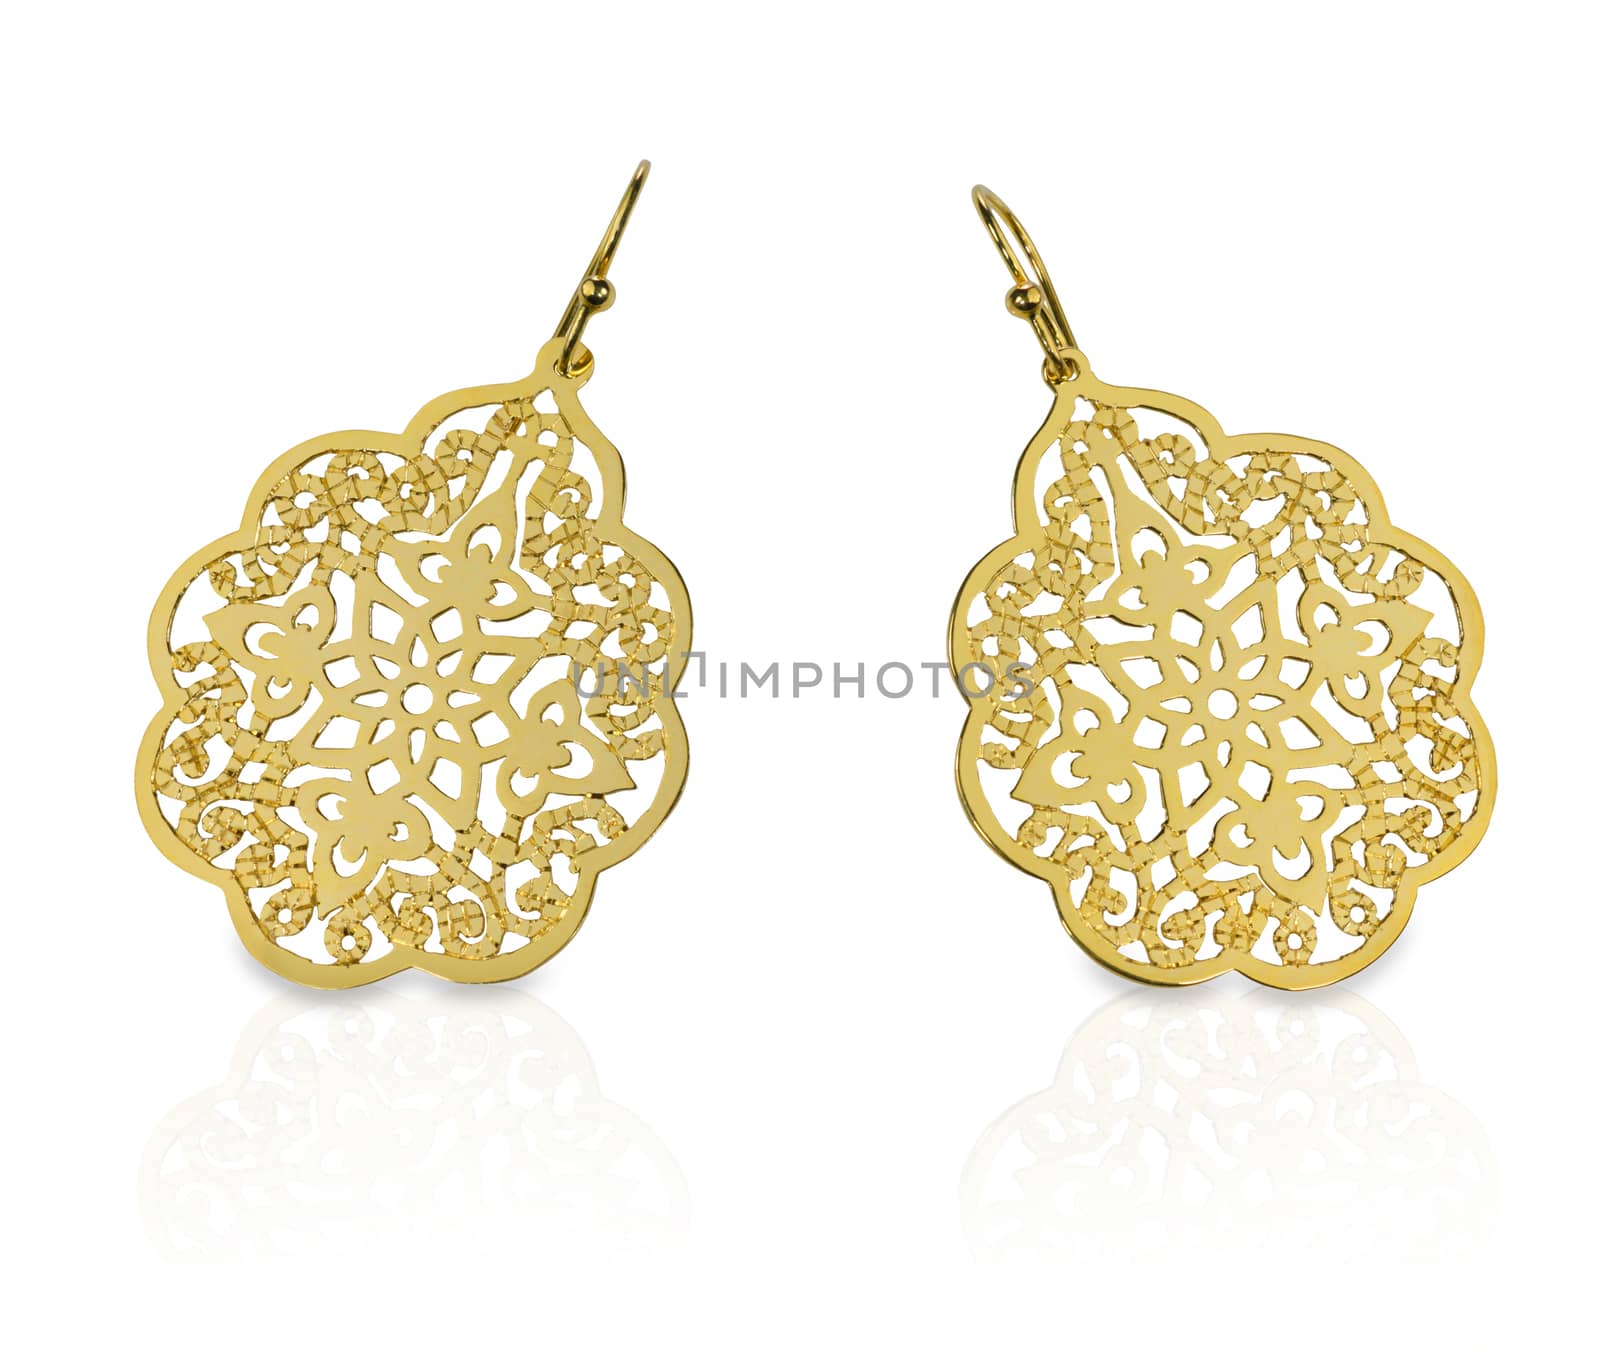 Gold Elaborate Filigree Earrings by fruitcocktail